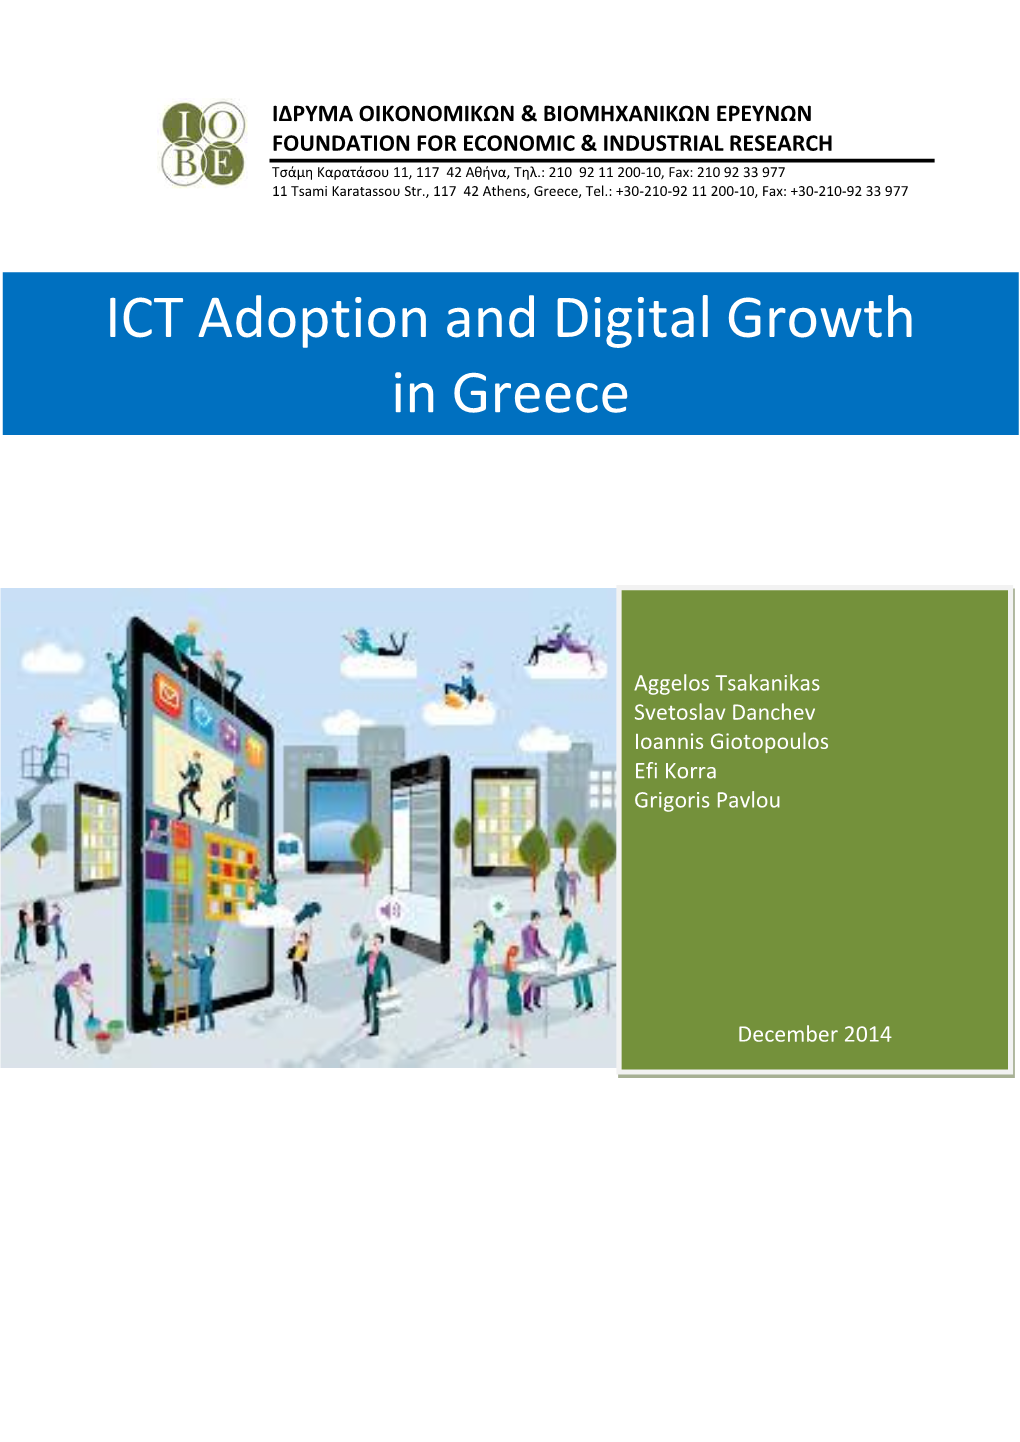 ICT Adoption and Digital Growth in Greece